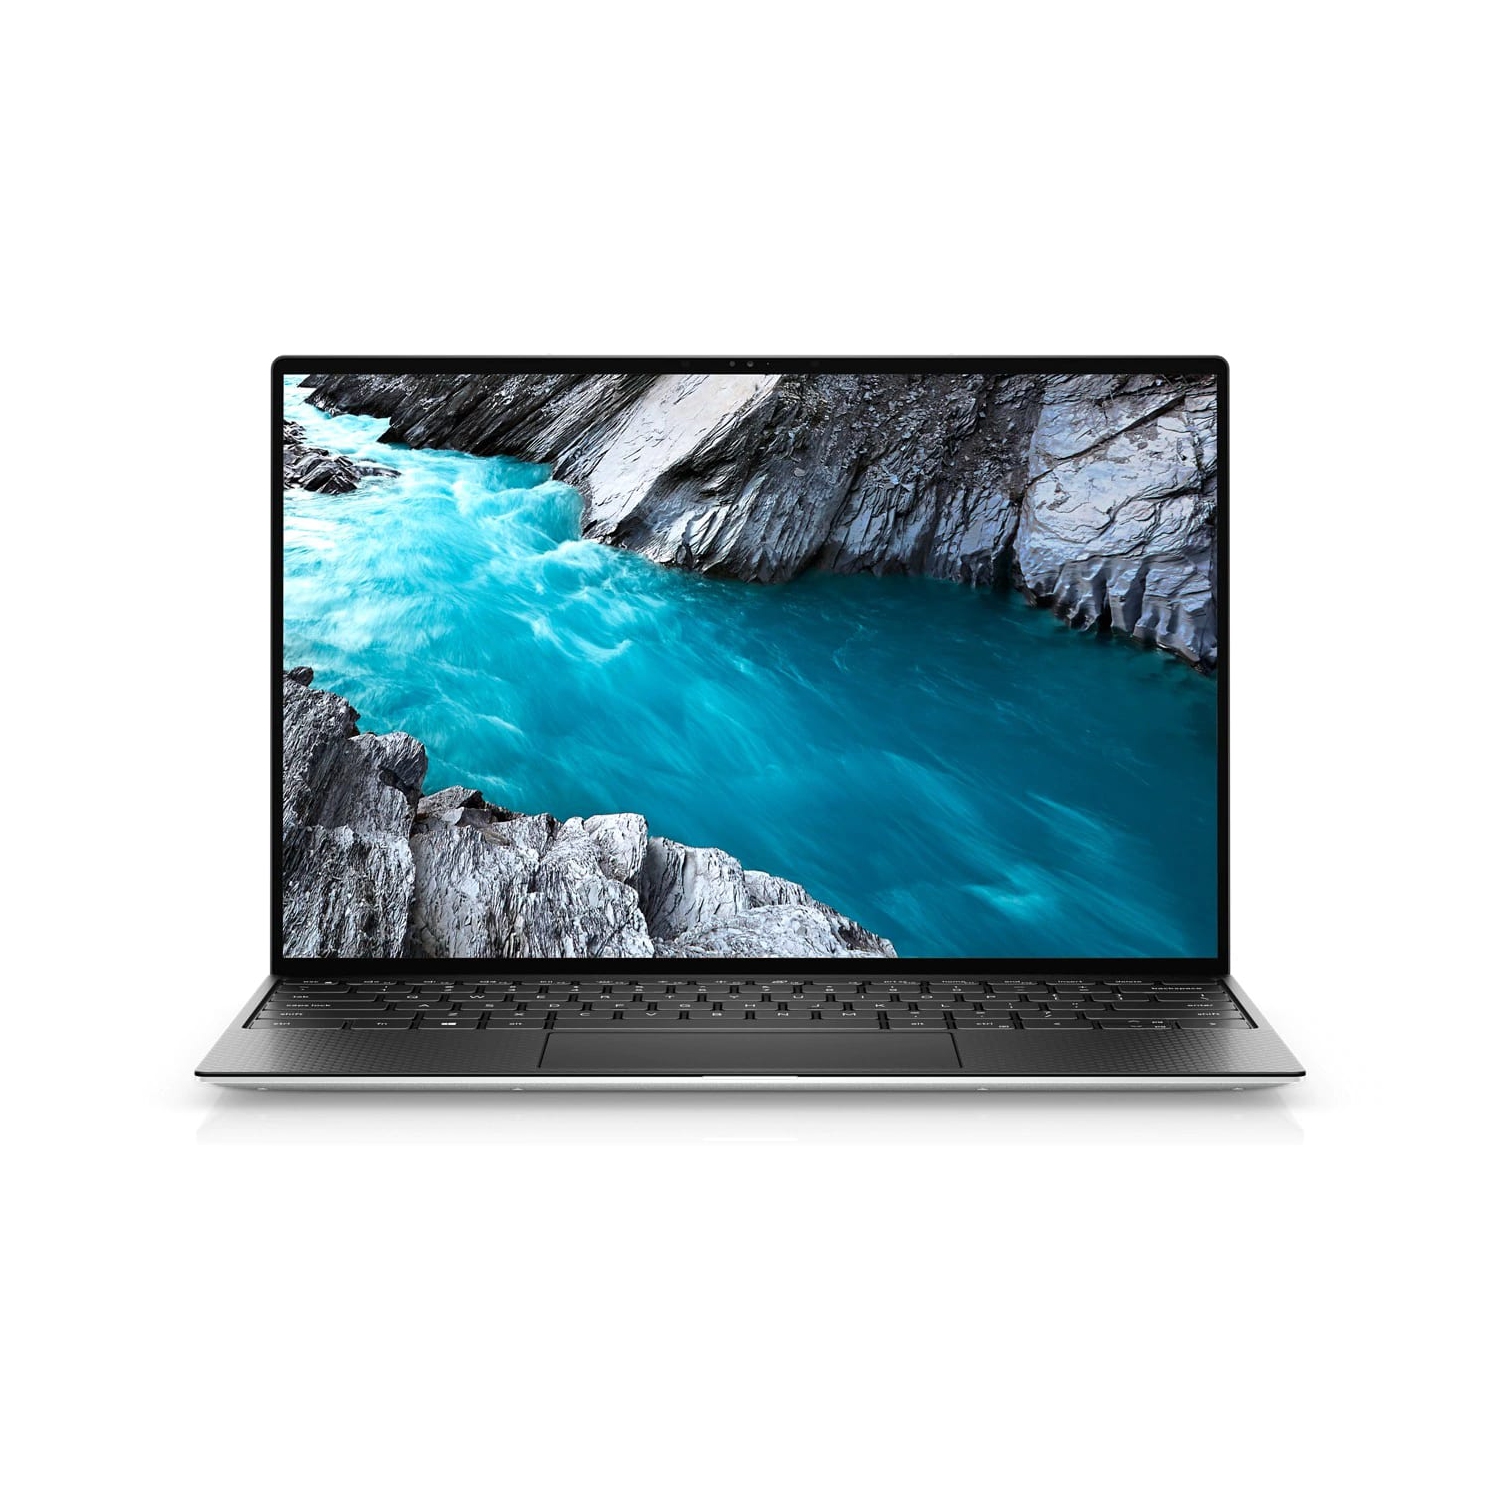 Refurbished (Excellent) - Dell XPS 13 9310 Laptop (2020) | 13.4" FHD+ Touch | Core i7 - 2TB SSD - 32GB RAM | 4 Cores @ 4.7 GHz - 11th Gen CPU Certified Refurbished